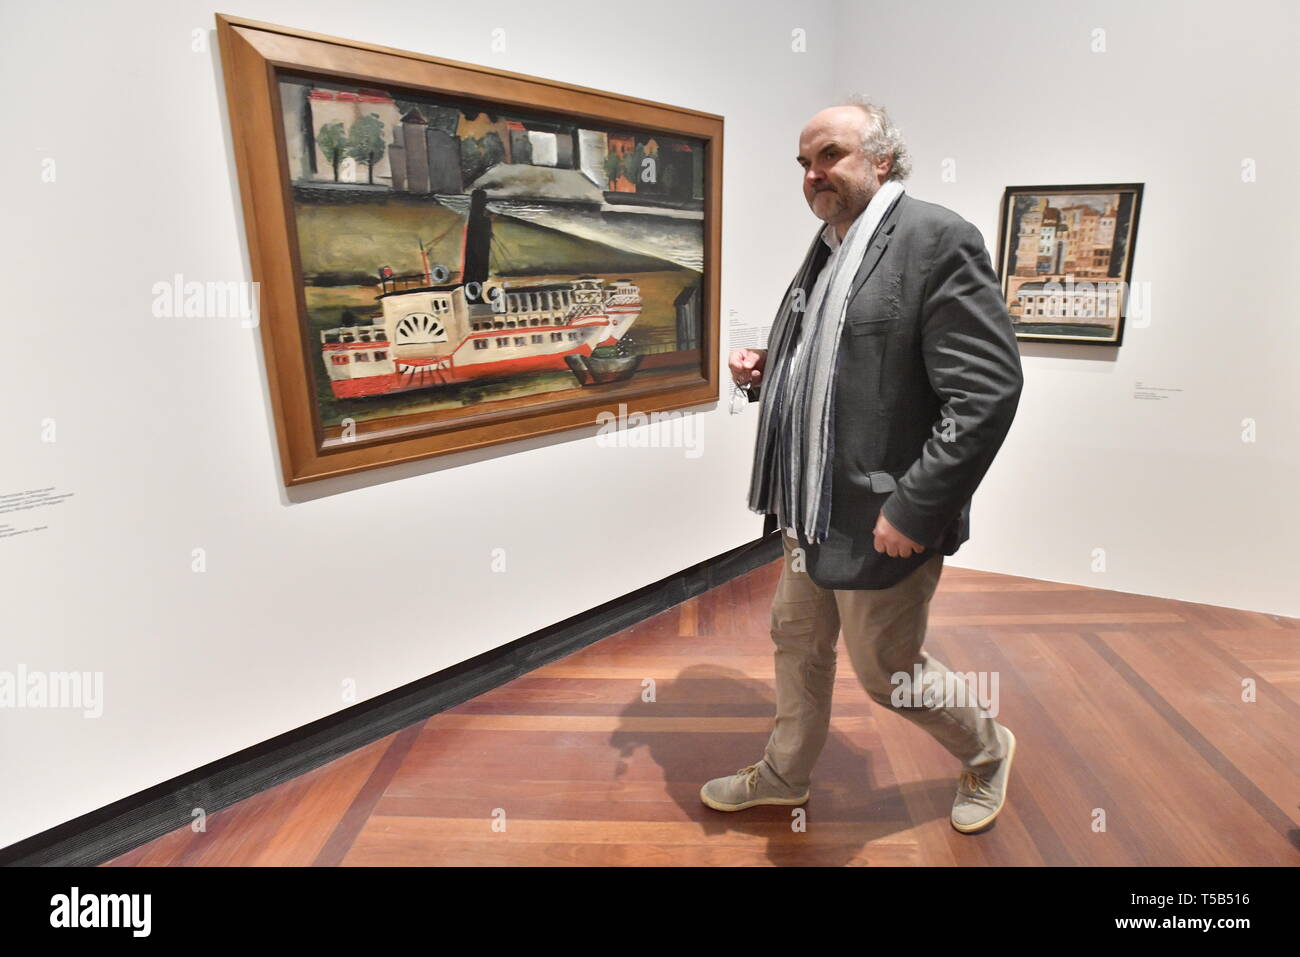 The National Gallery Prague (NGP) may lose the exhibition Dimensions of Dialogue offering the works of art by famous personalities of modern and contemporary art due to the dismissal of its director Jiri Fajt (pictured) art collector Erika Hoffmann told journalists on the 21th of April 2019. In the situation which has occurred after Fajt's sudden dismissal, the legal aspects of our cooperation will have to be reconsidered,' she added. Dismissed National Gallery Prague director Jiri Fajt visits Czech-born painter Josef Sima´s (1891-1971) exhibition Road to Le Grand Jeu in the Valdstejn Riding H Stock Photo